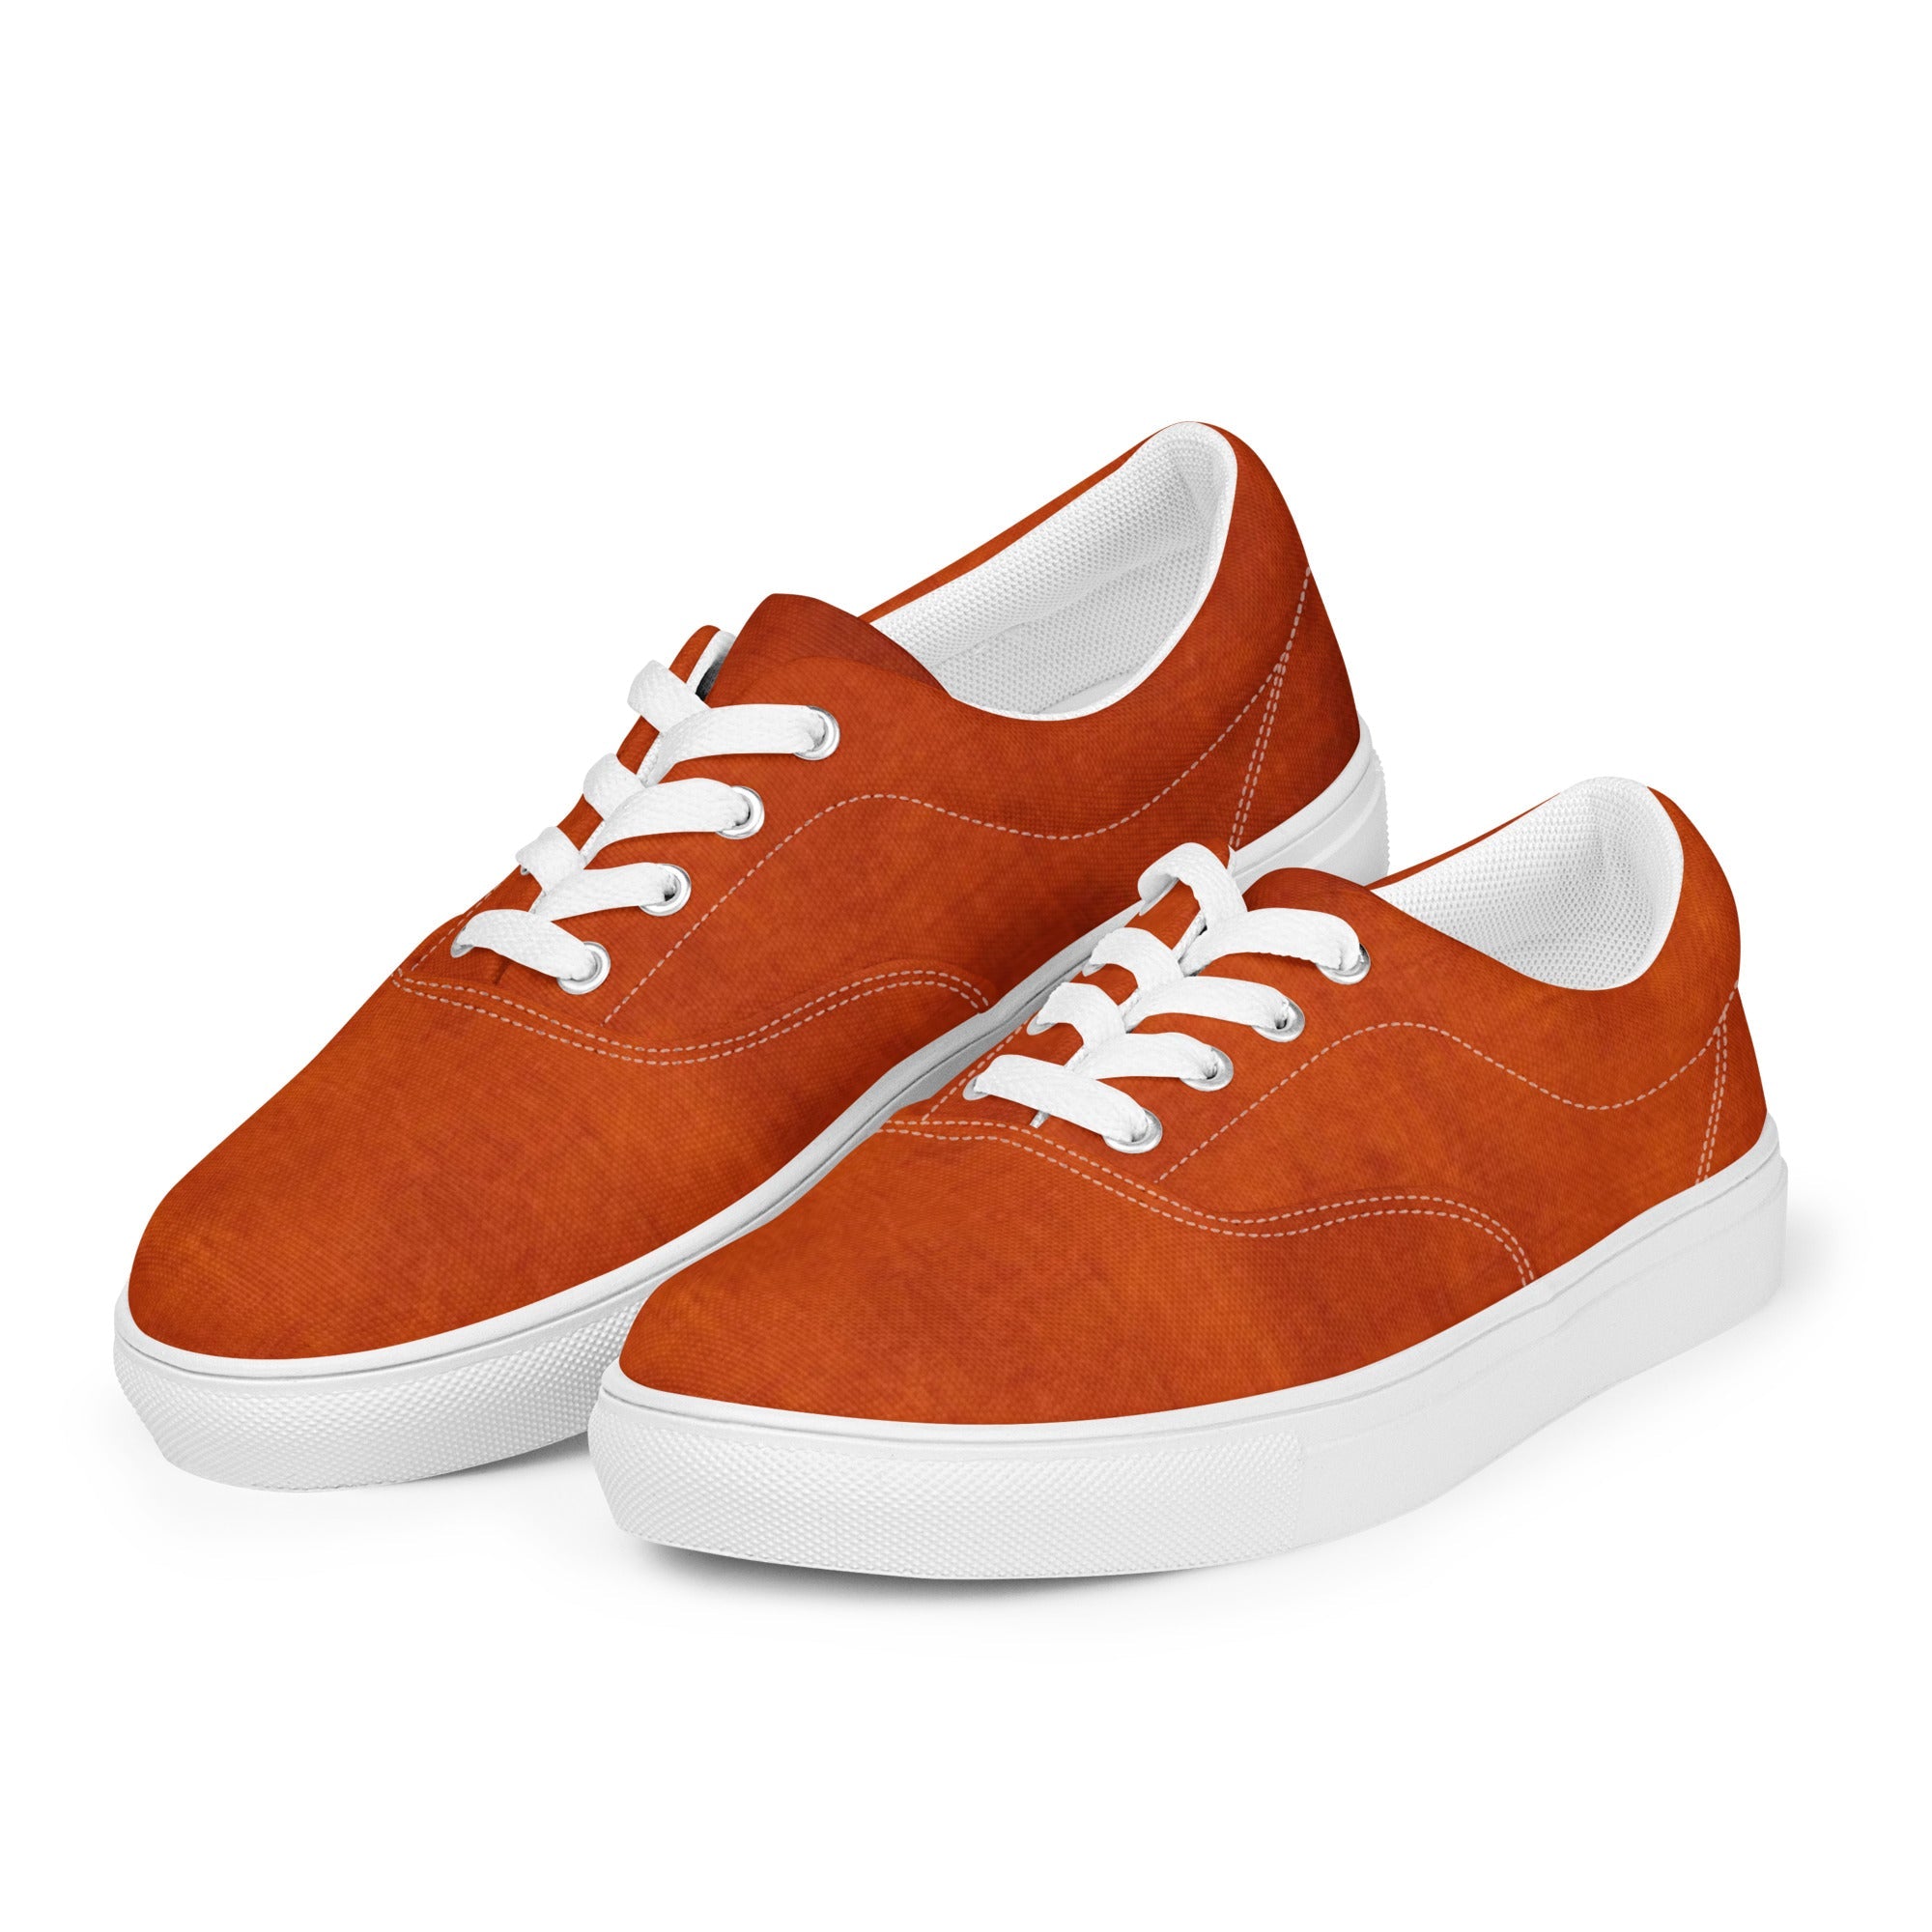 Womens lace-up canvas shoes